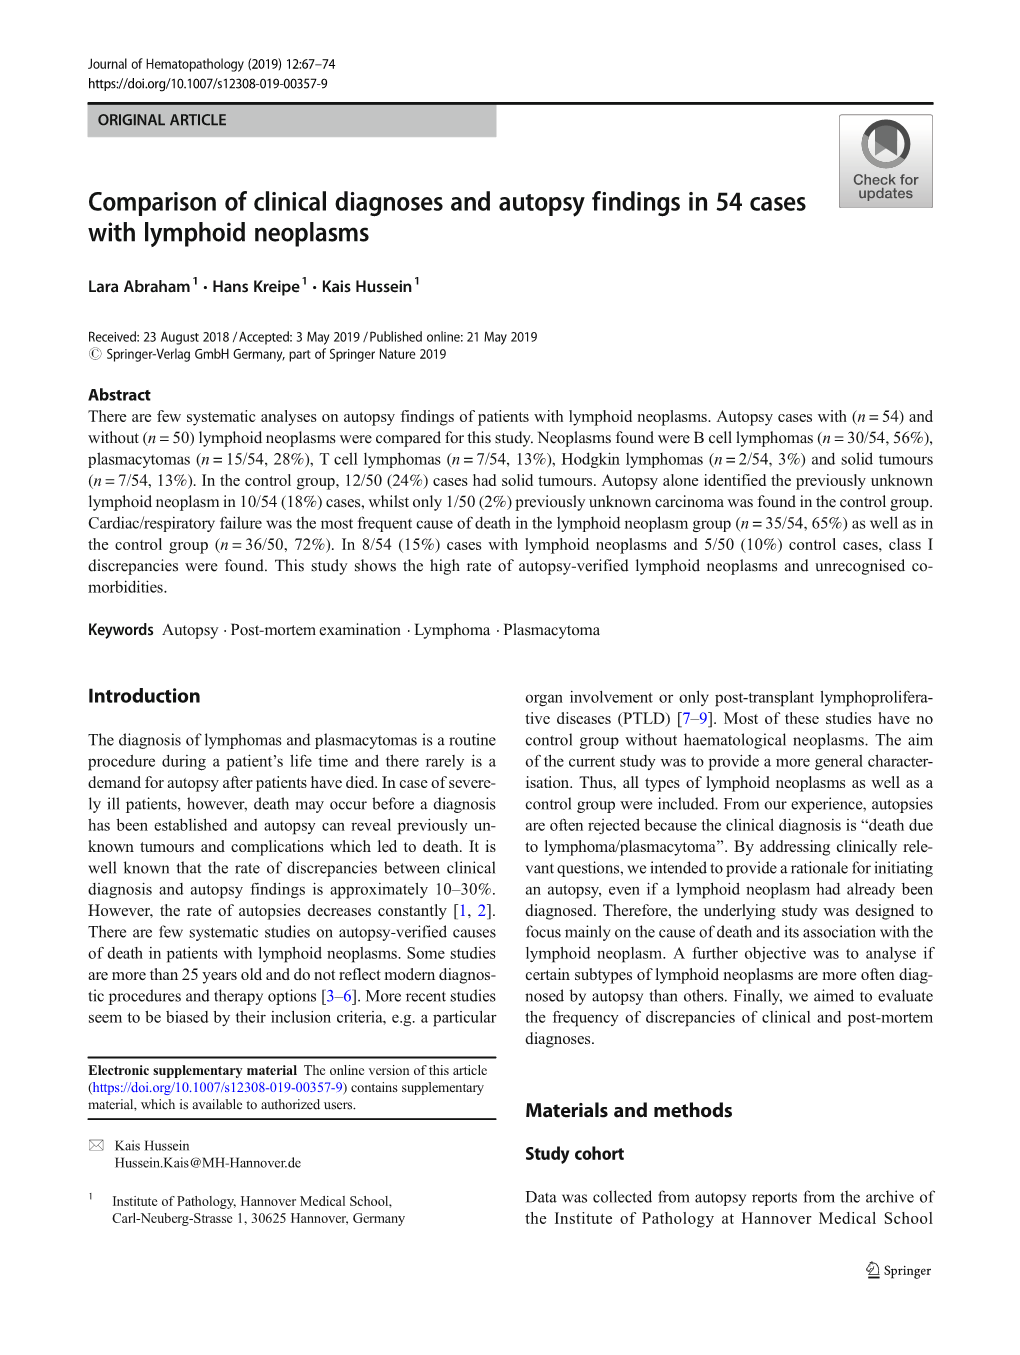 Comparison of Clinical Diagnoses and Autopsy Findings in 54 Cases with Lymphoid Neoplasms